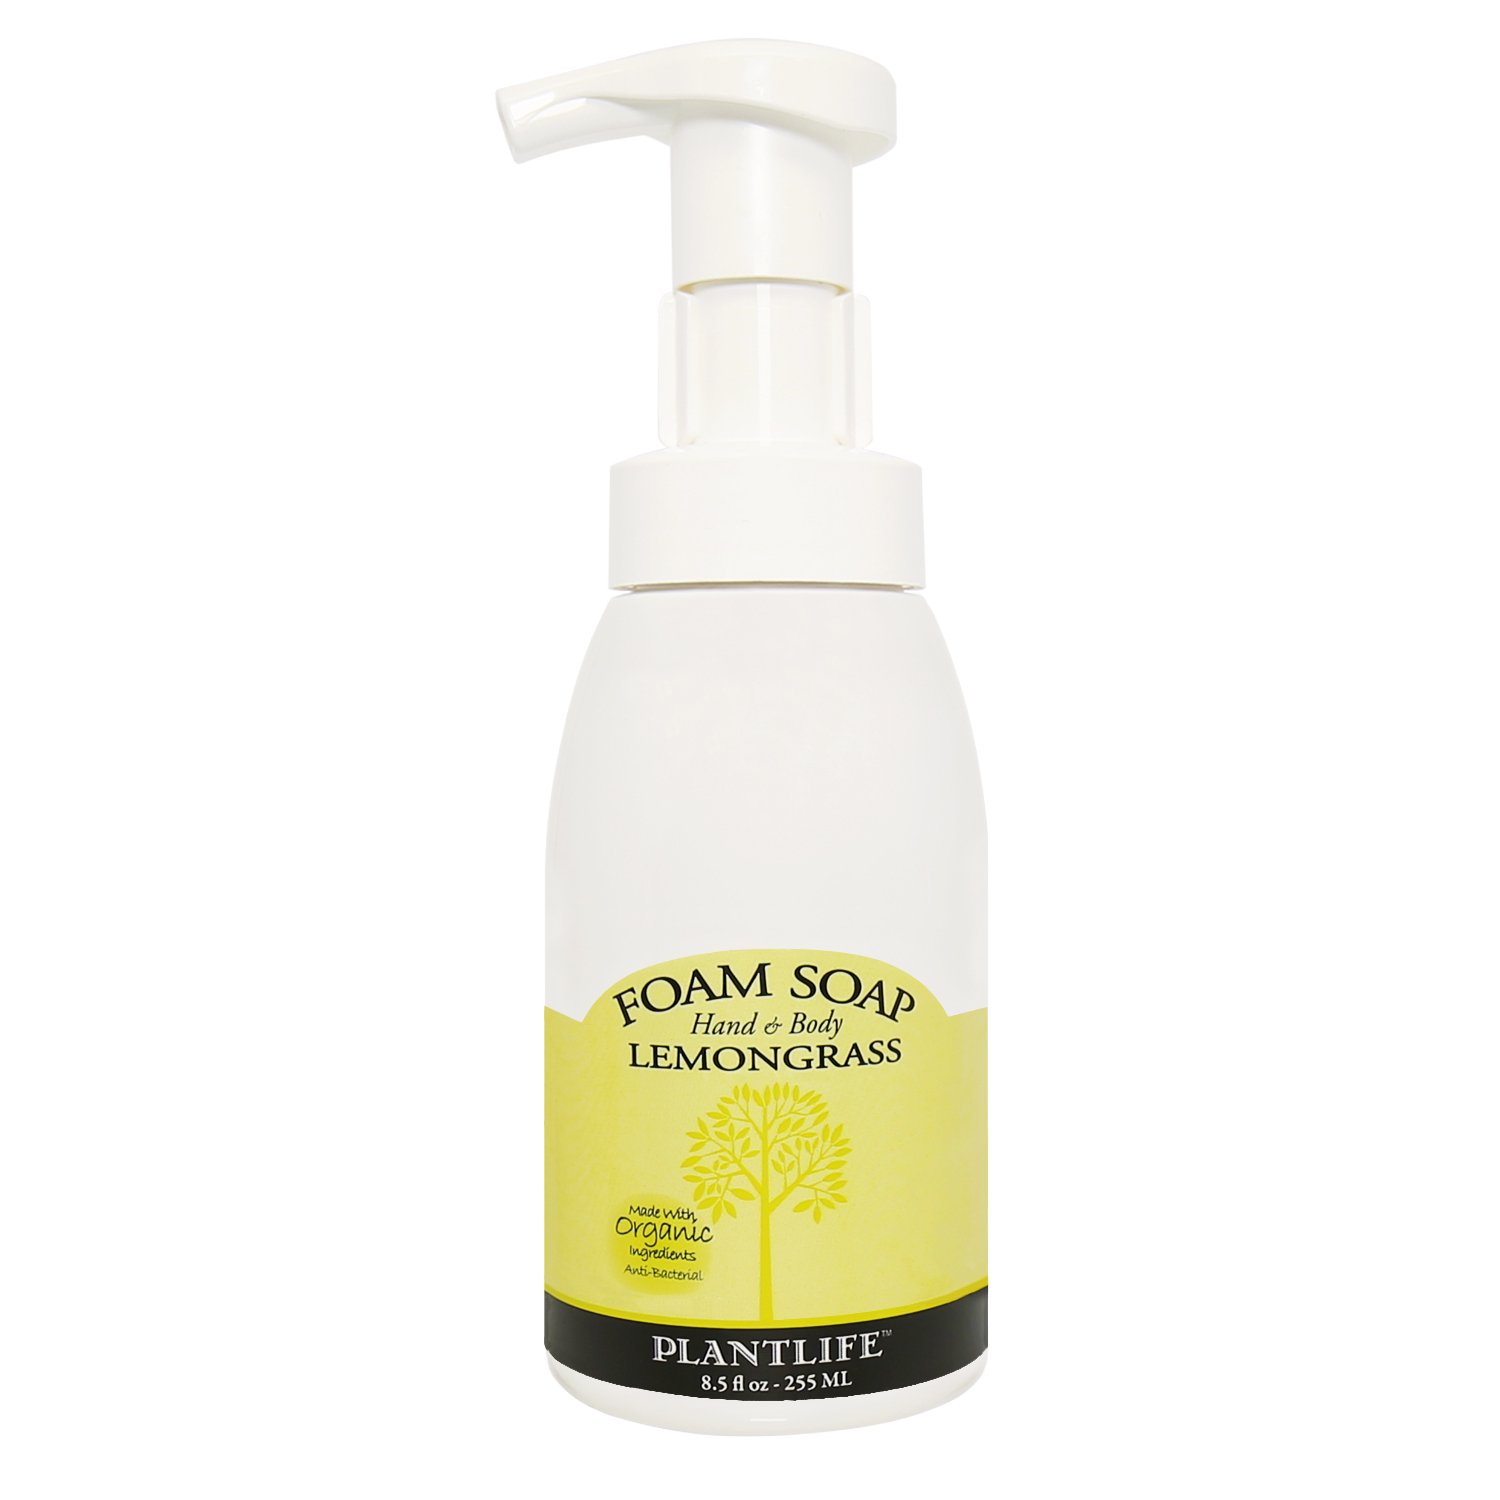 Plantlife Lemongrass Foam Soap - Gentle, Moisturizing, Plant-based Foam Soap for All Skin Types - For use as a Hand & Body wash, Shaving Cream, and Foaming Fun for Kids - Made in California 8.5 oz